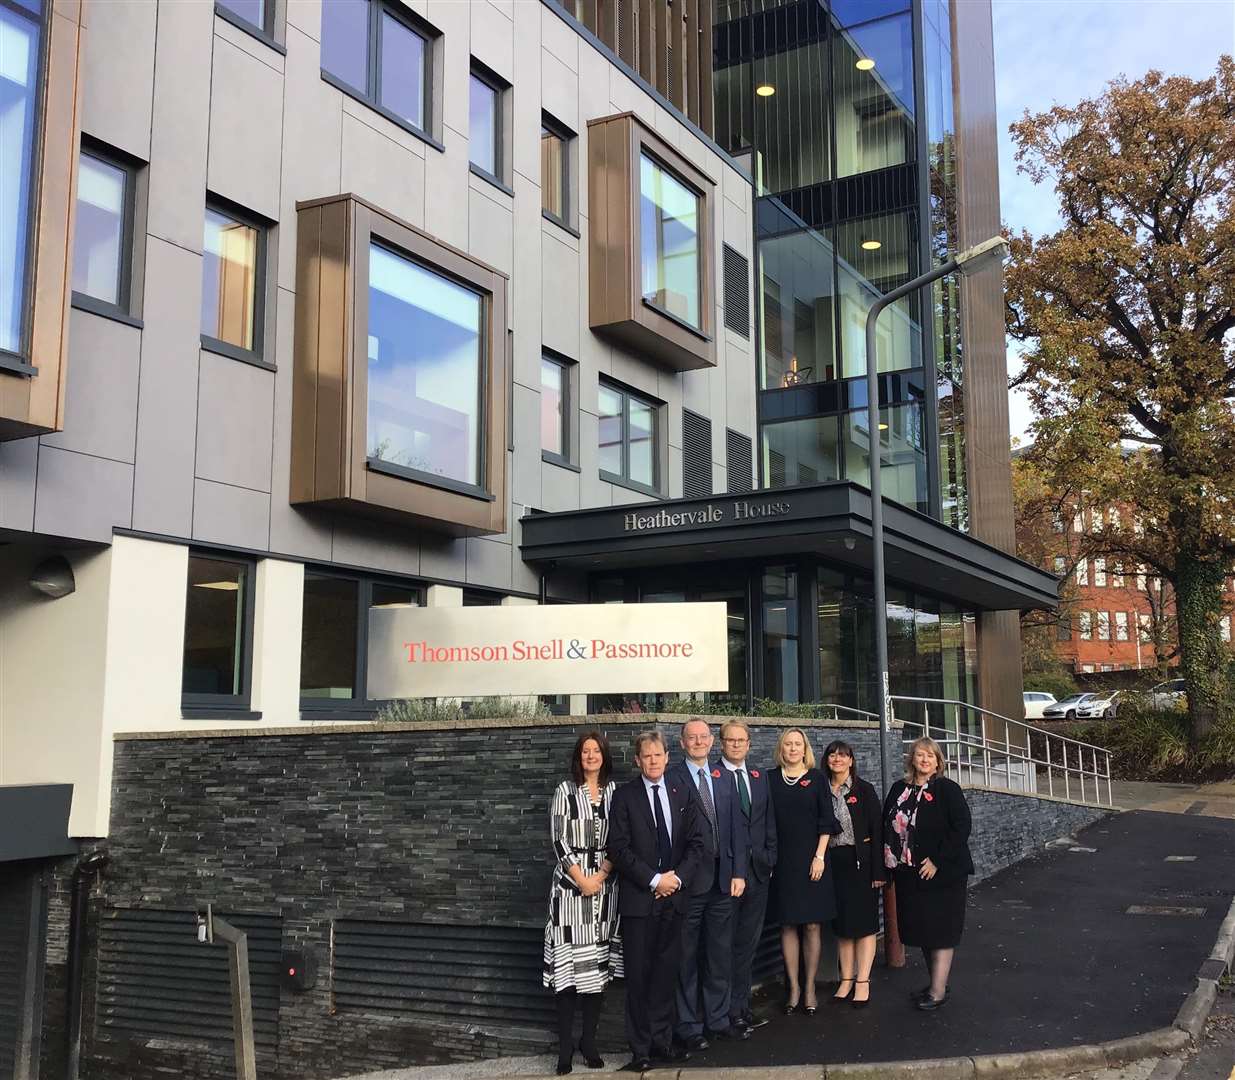 Thomson Snell & Passmore's new Tunbridge Wells offices - adjacent to its former site which is now ear-marked for transformation